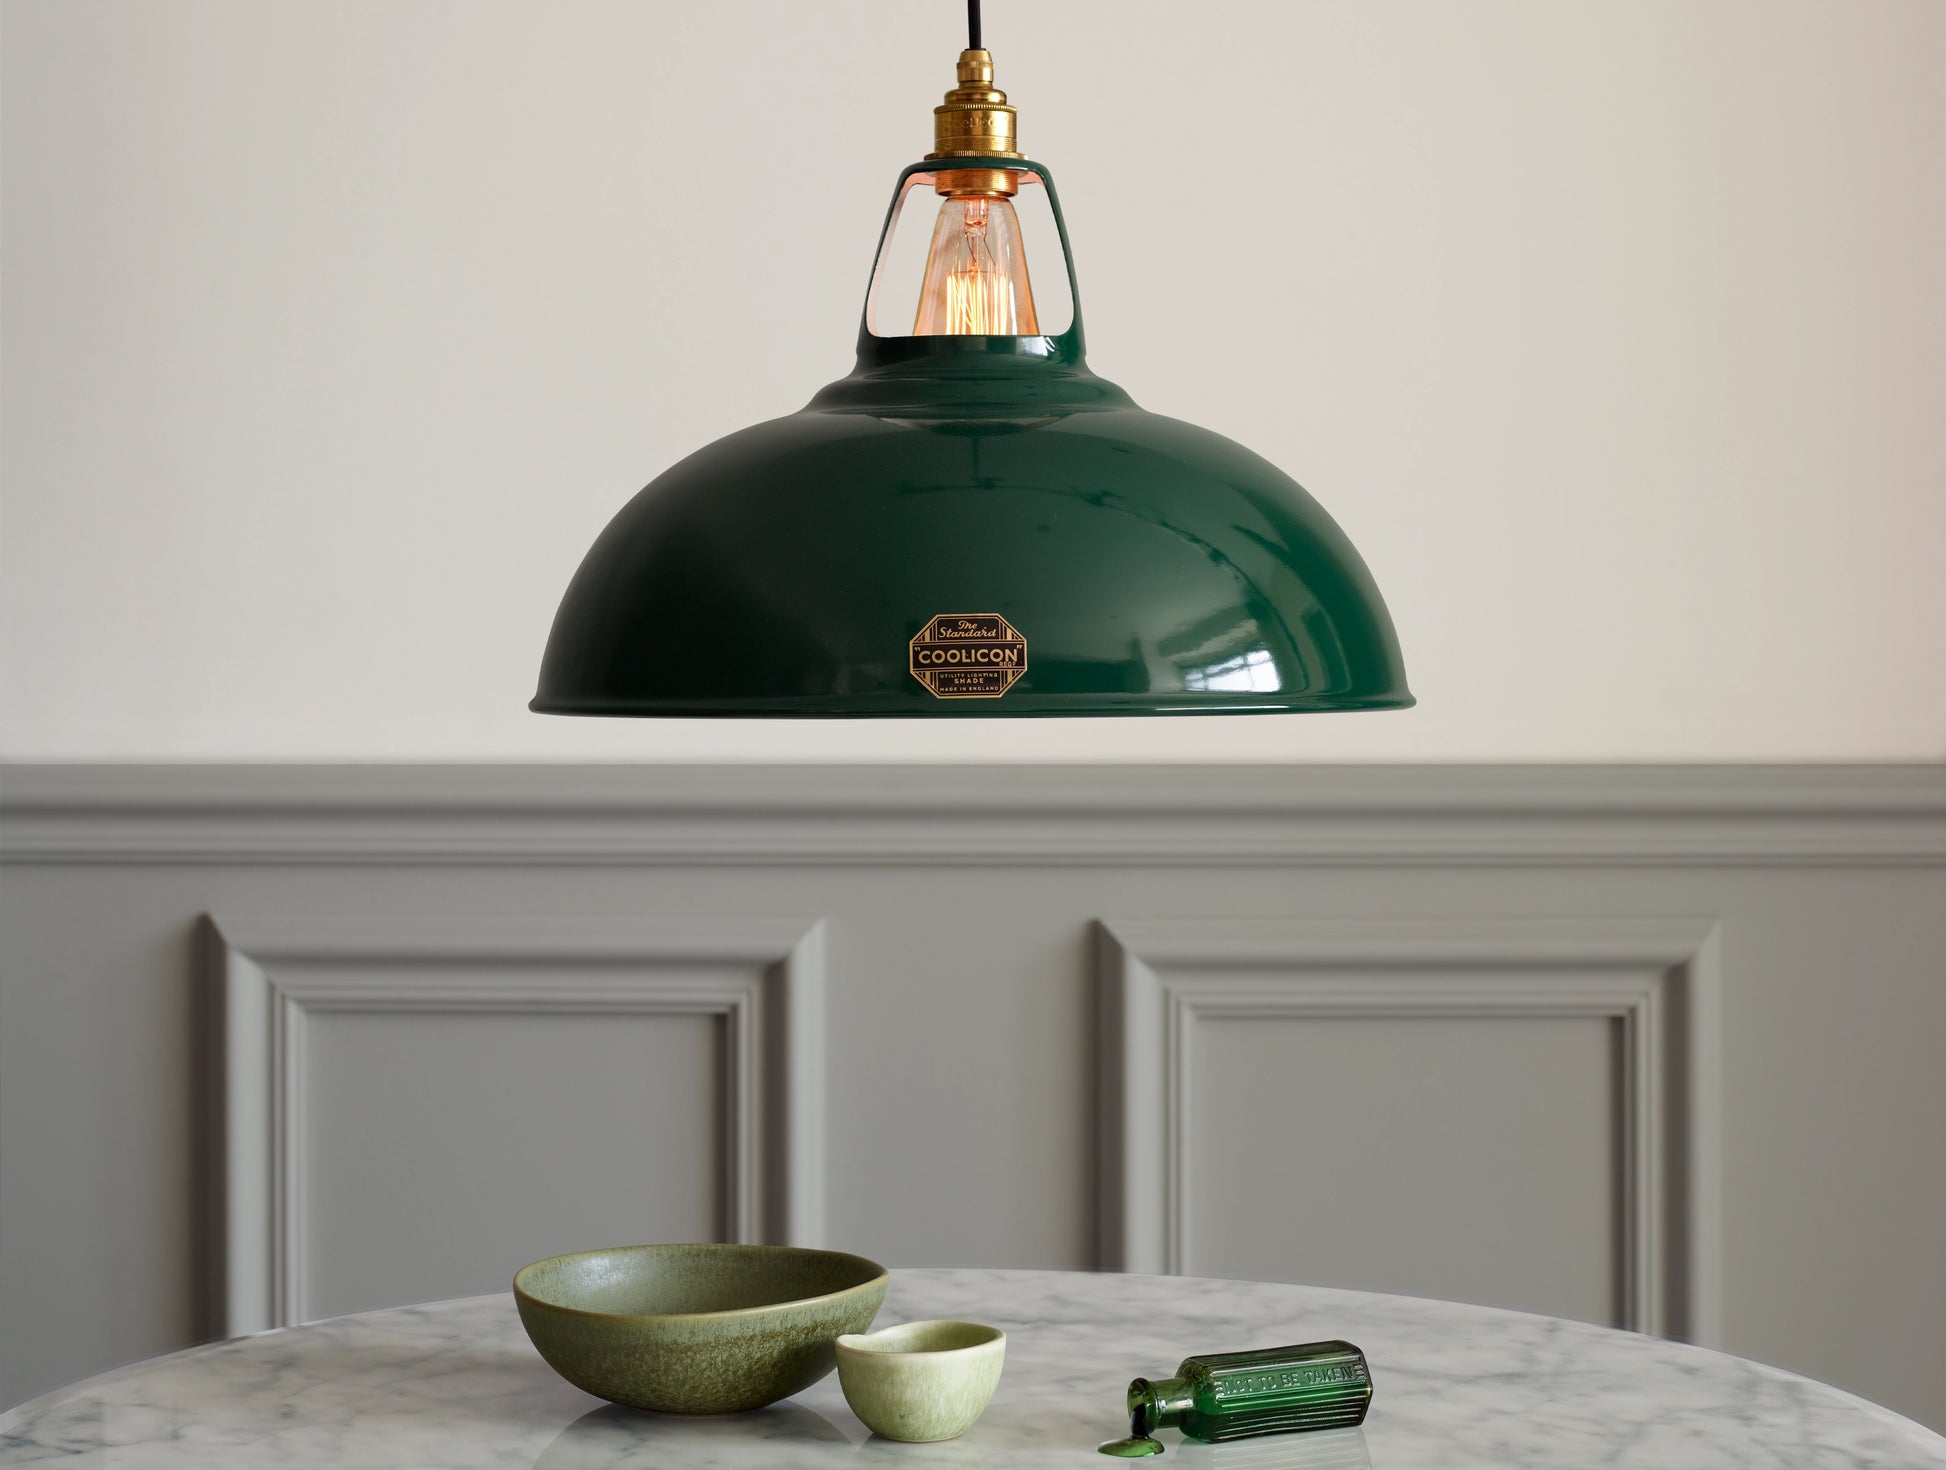 A Large Coolicon Original Green lampshade hanging over a marble table. Two green bowls and a small green glass bottle spilling a green liquid are placed on the table